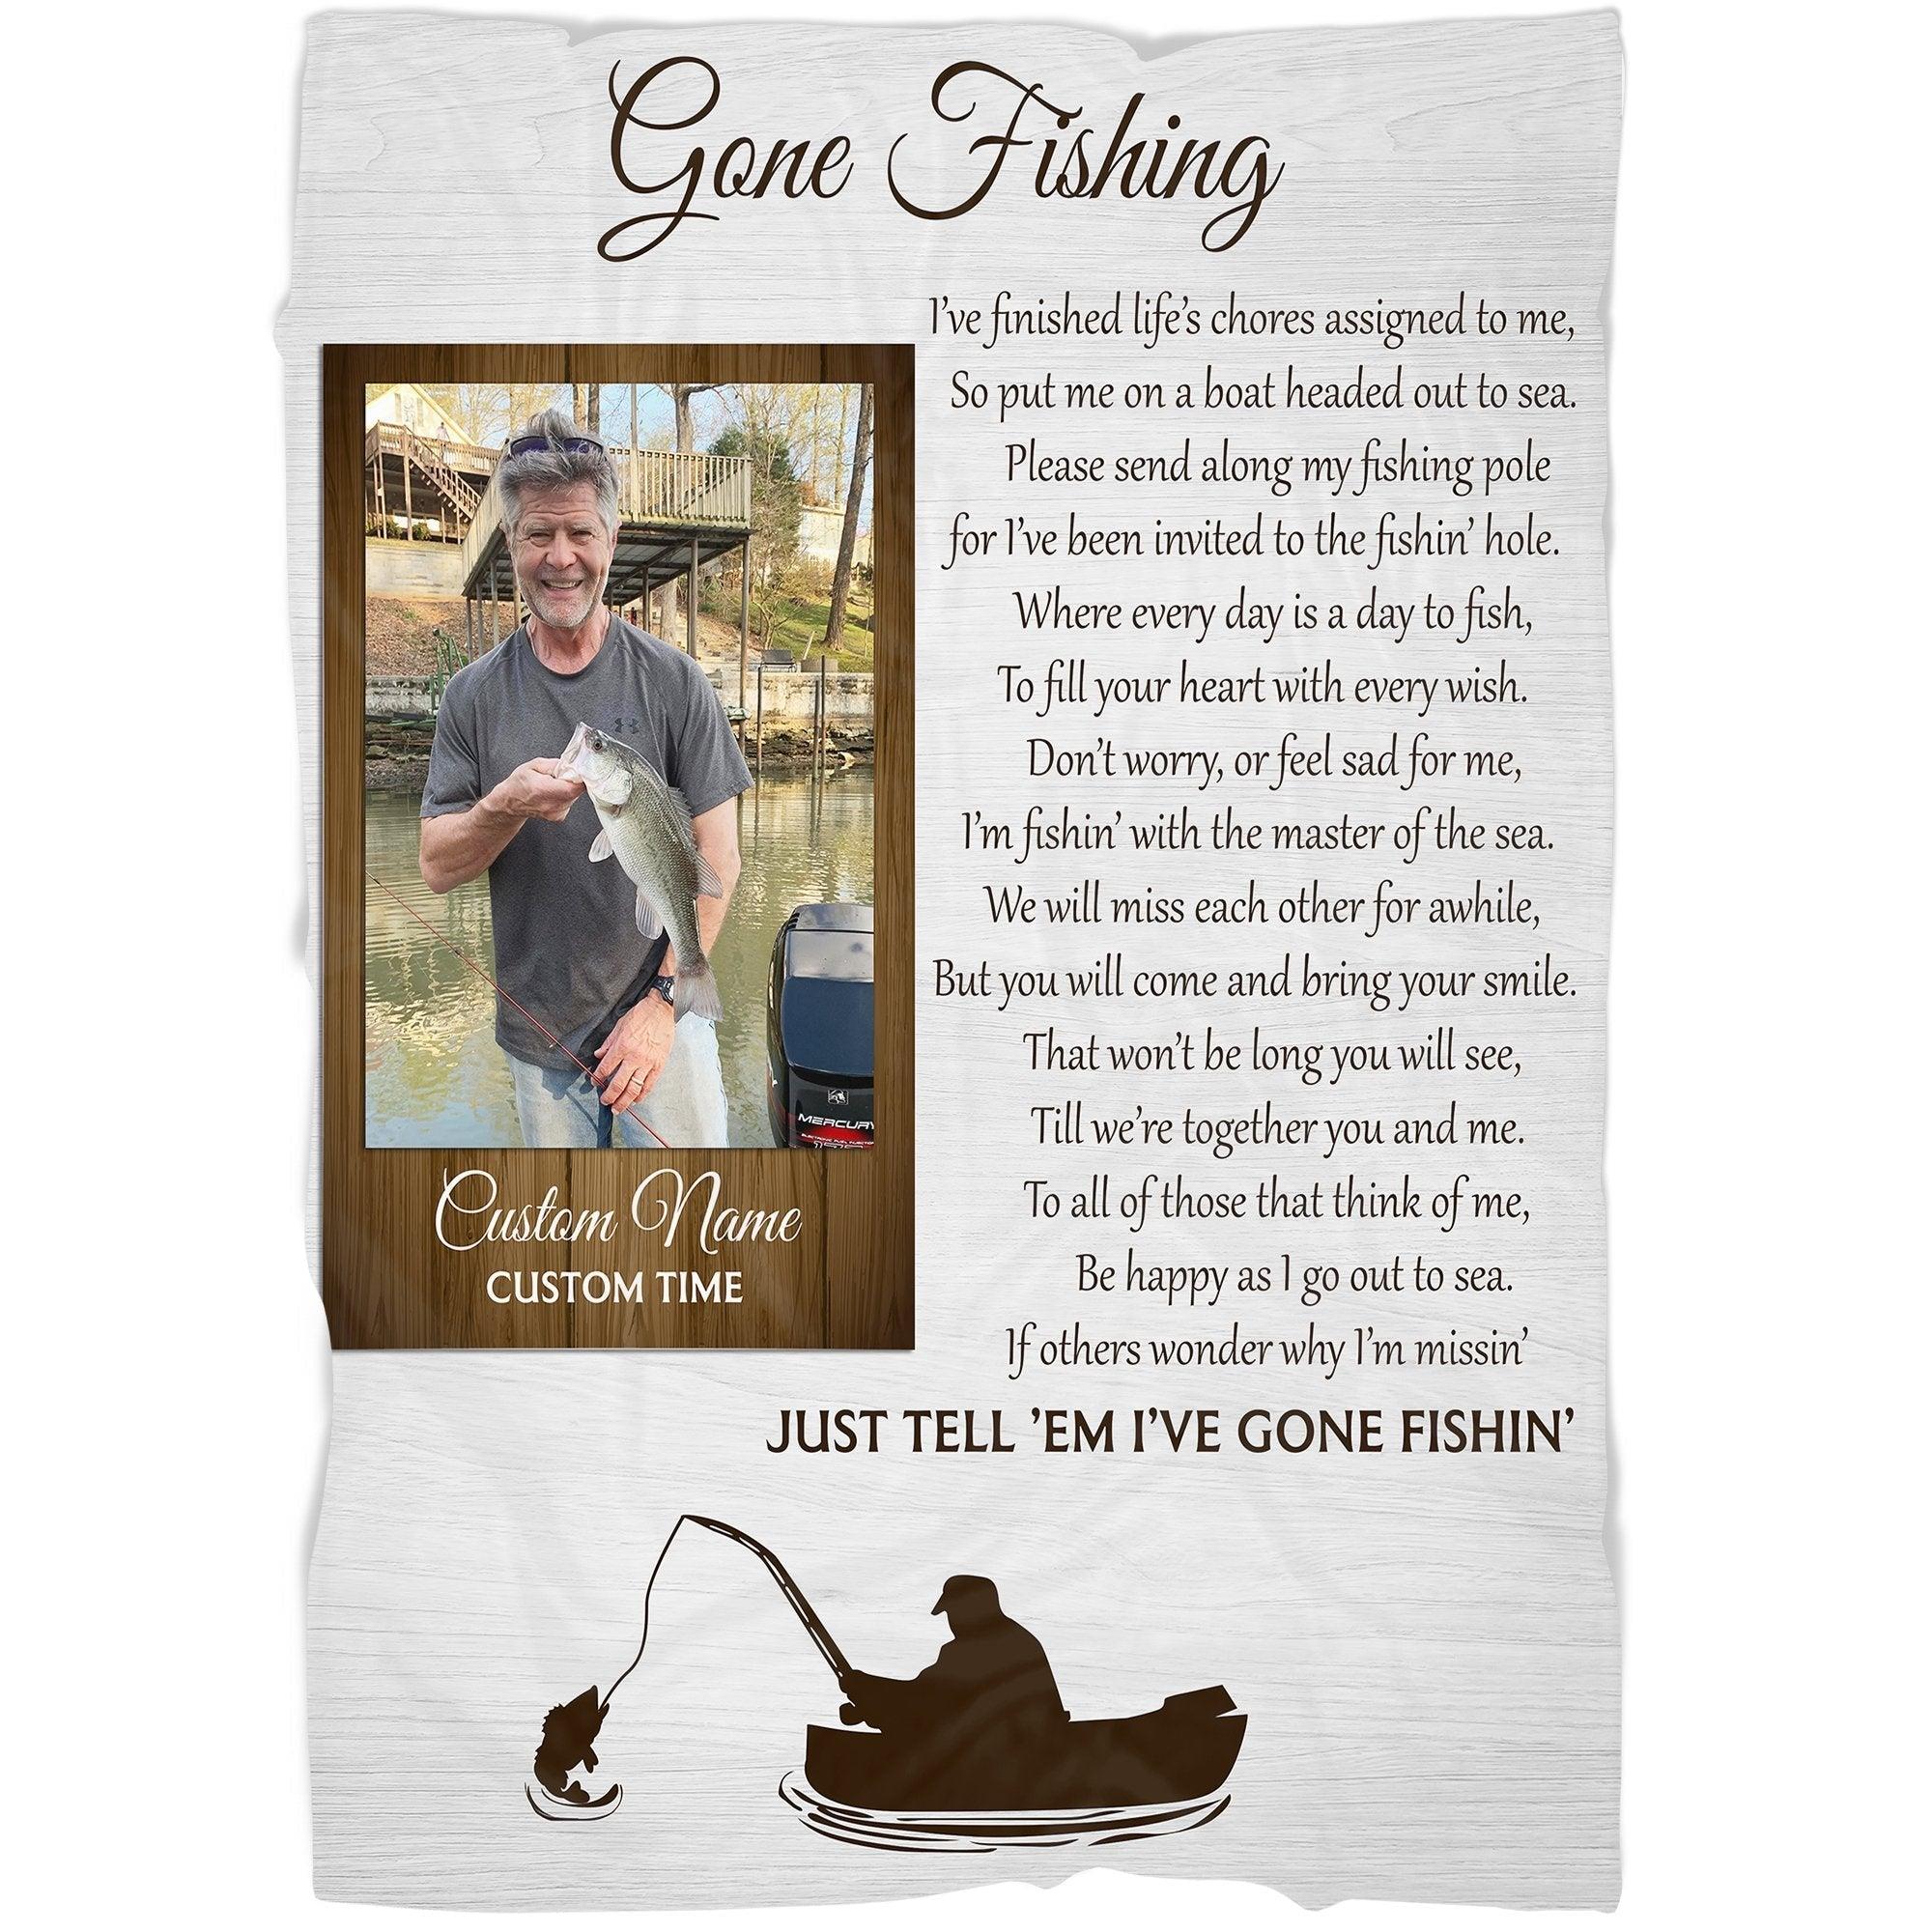 Memorial Blanket - Personalized Fishing Memorial Blanket Home Decor Bedding Couch Sofa Soft And Comfy Cozy Memorial Gift, Bereavement Sympathy Blanket for Fisherman